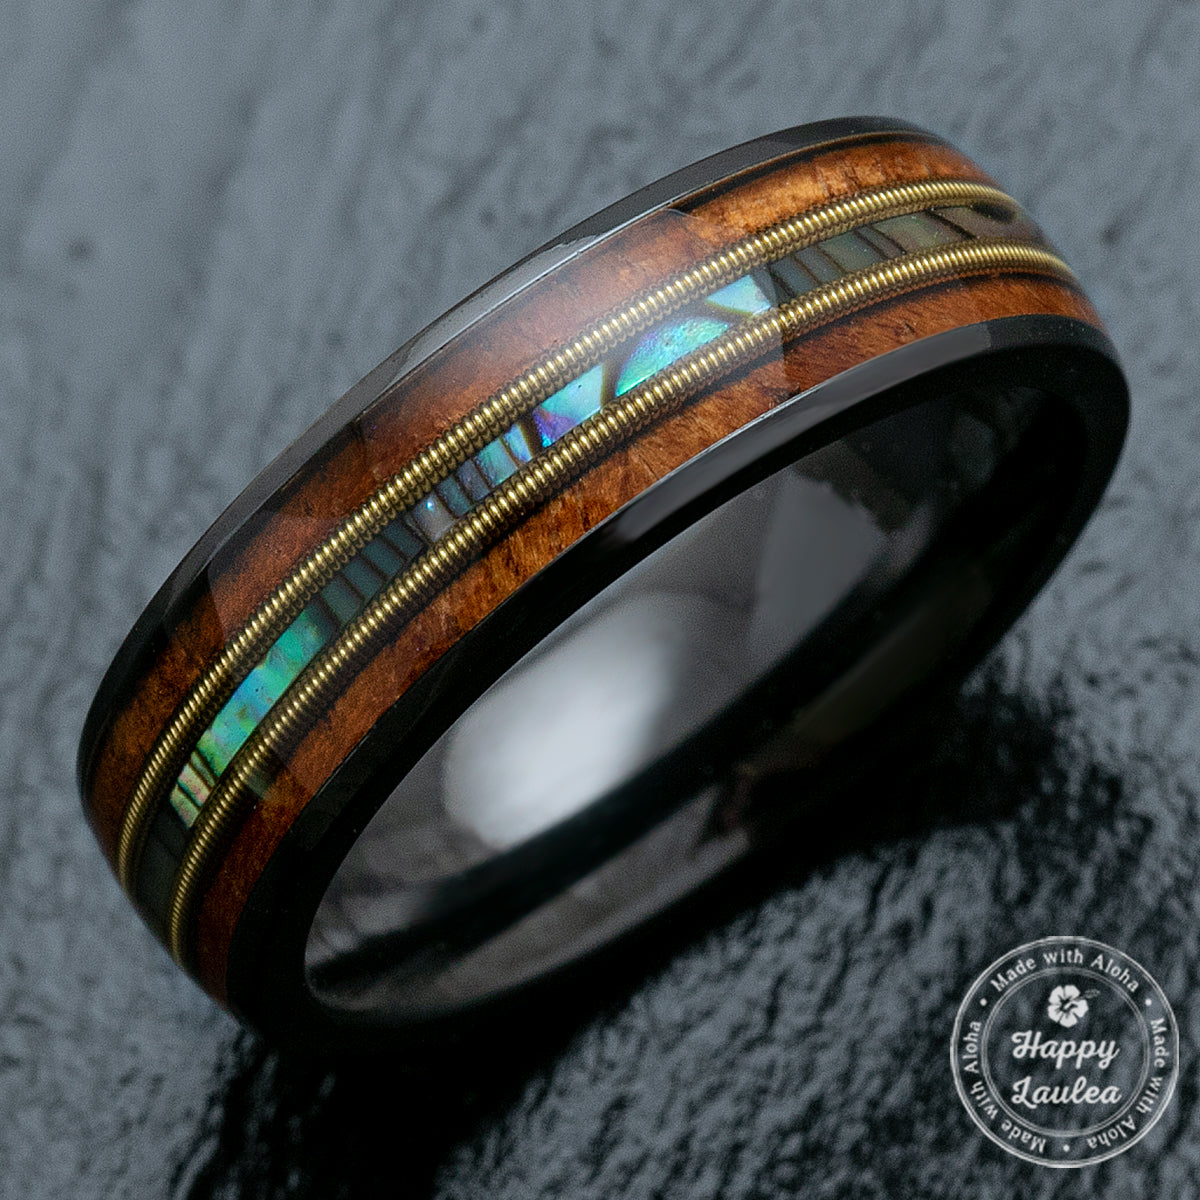 Black Zirconium Ring with Guitar String, Abalone Shell, & Koa Wood Tri-Inlay - 6mm, Dome Shape, Comfort Fitment